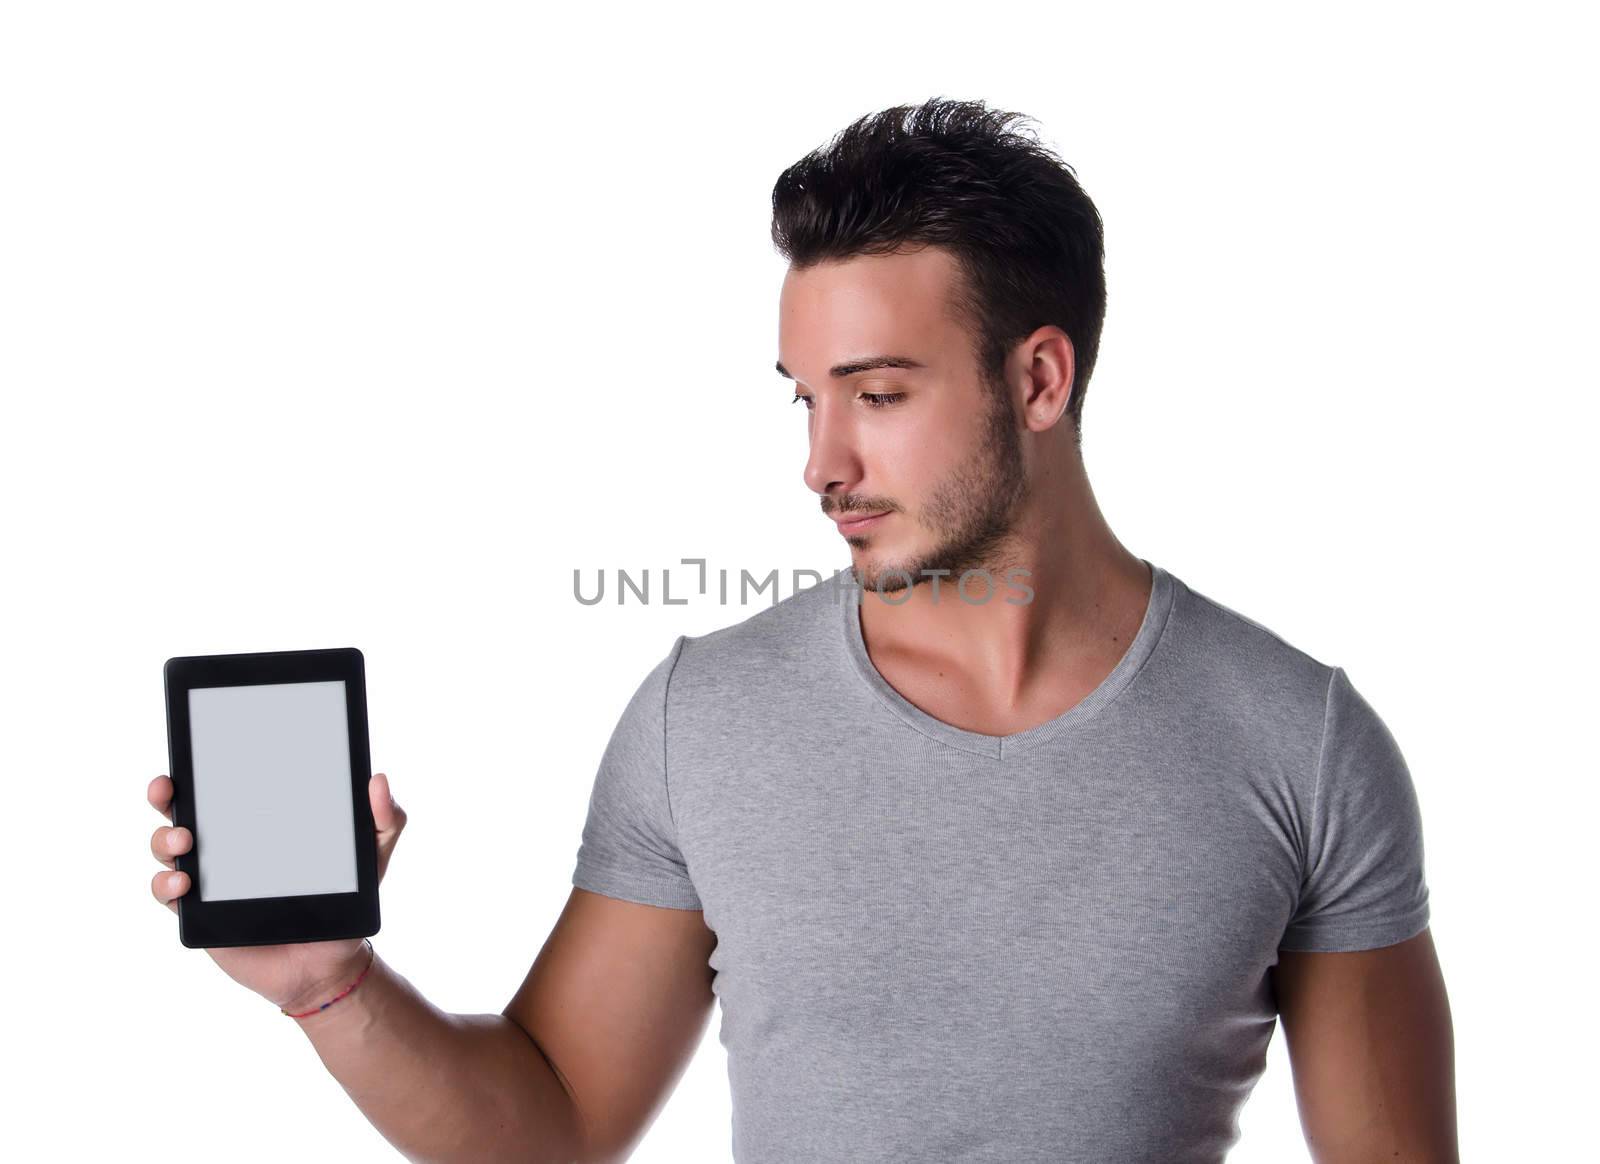 Handsome young man holding and looking at ebook reader, blank display, isolated on white